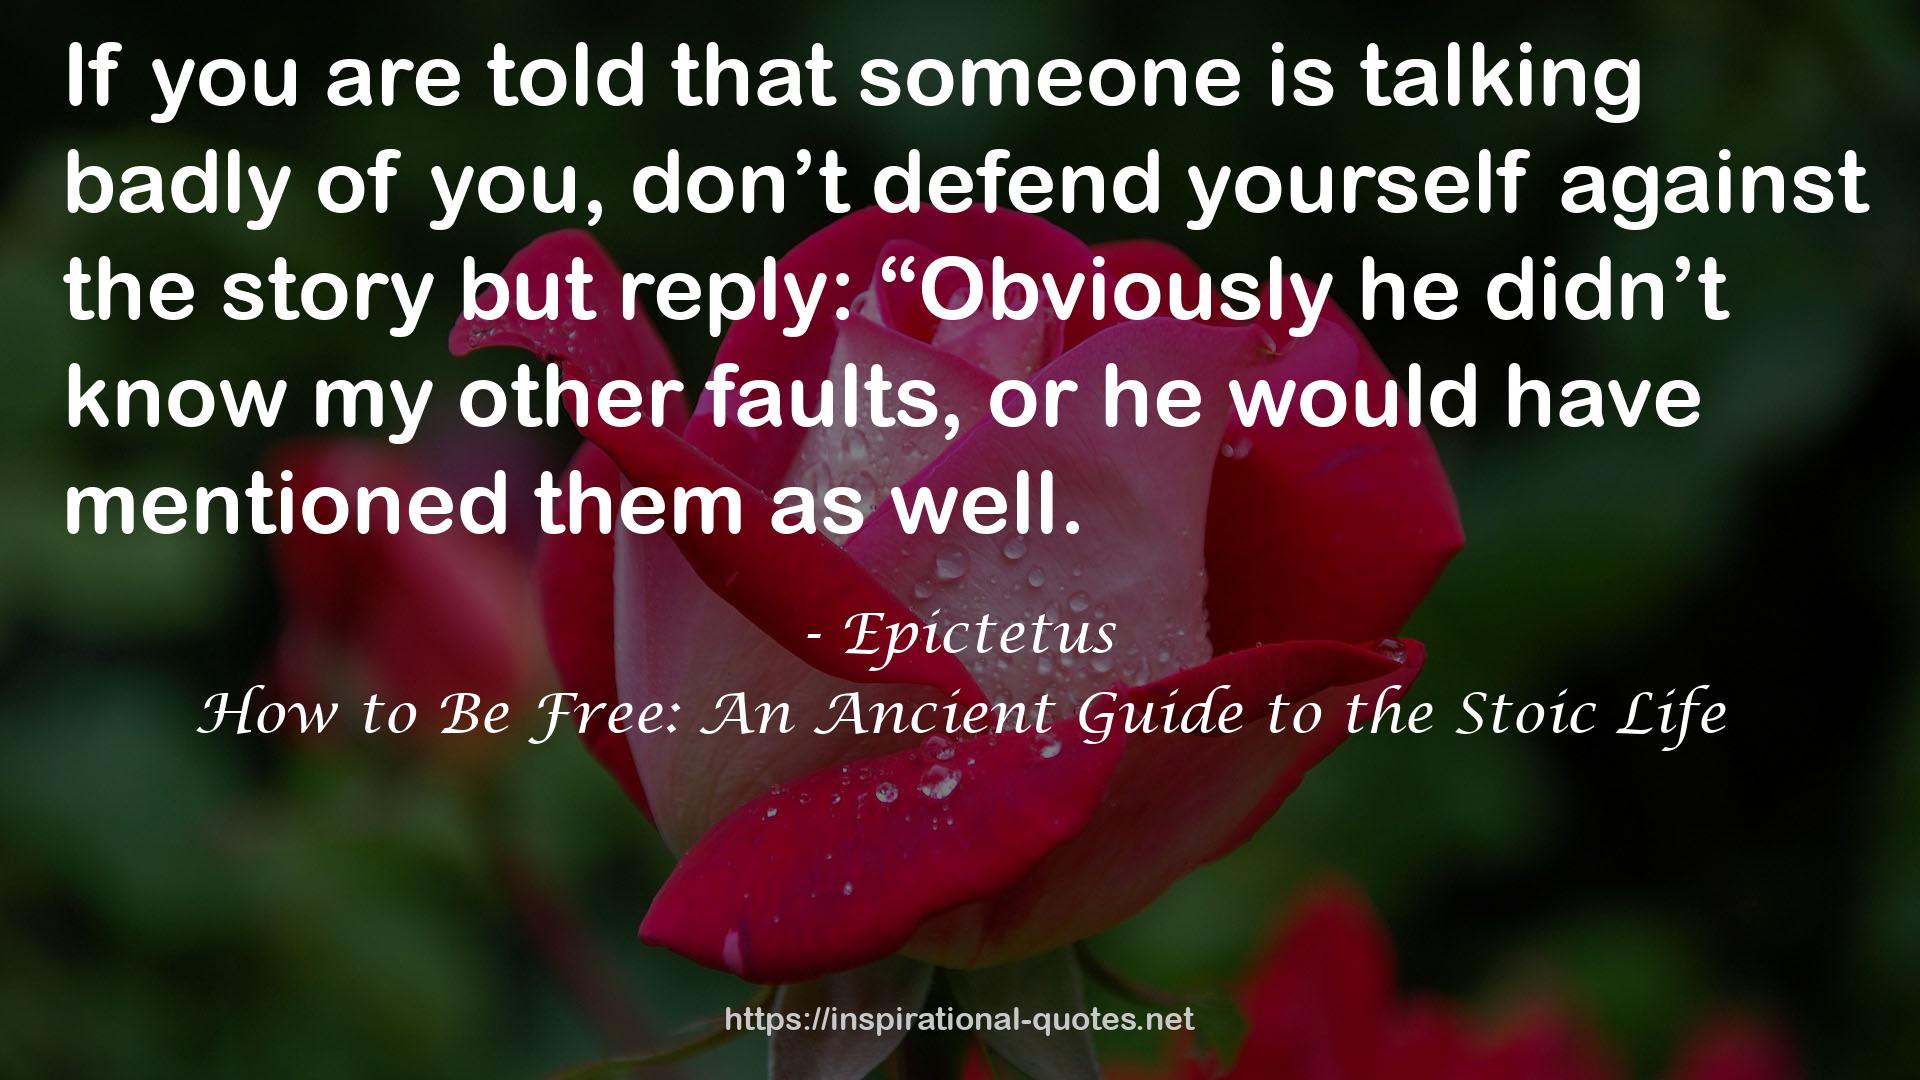 How to Be Free: An Ancient Guide to the Stoic Life QUOTES